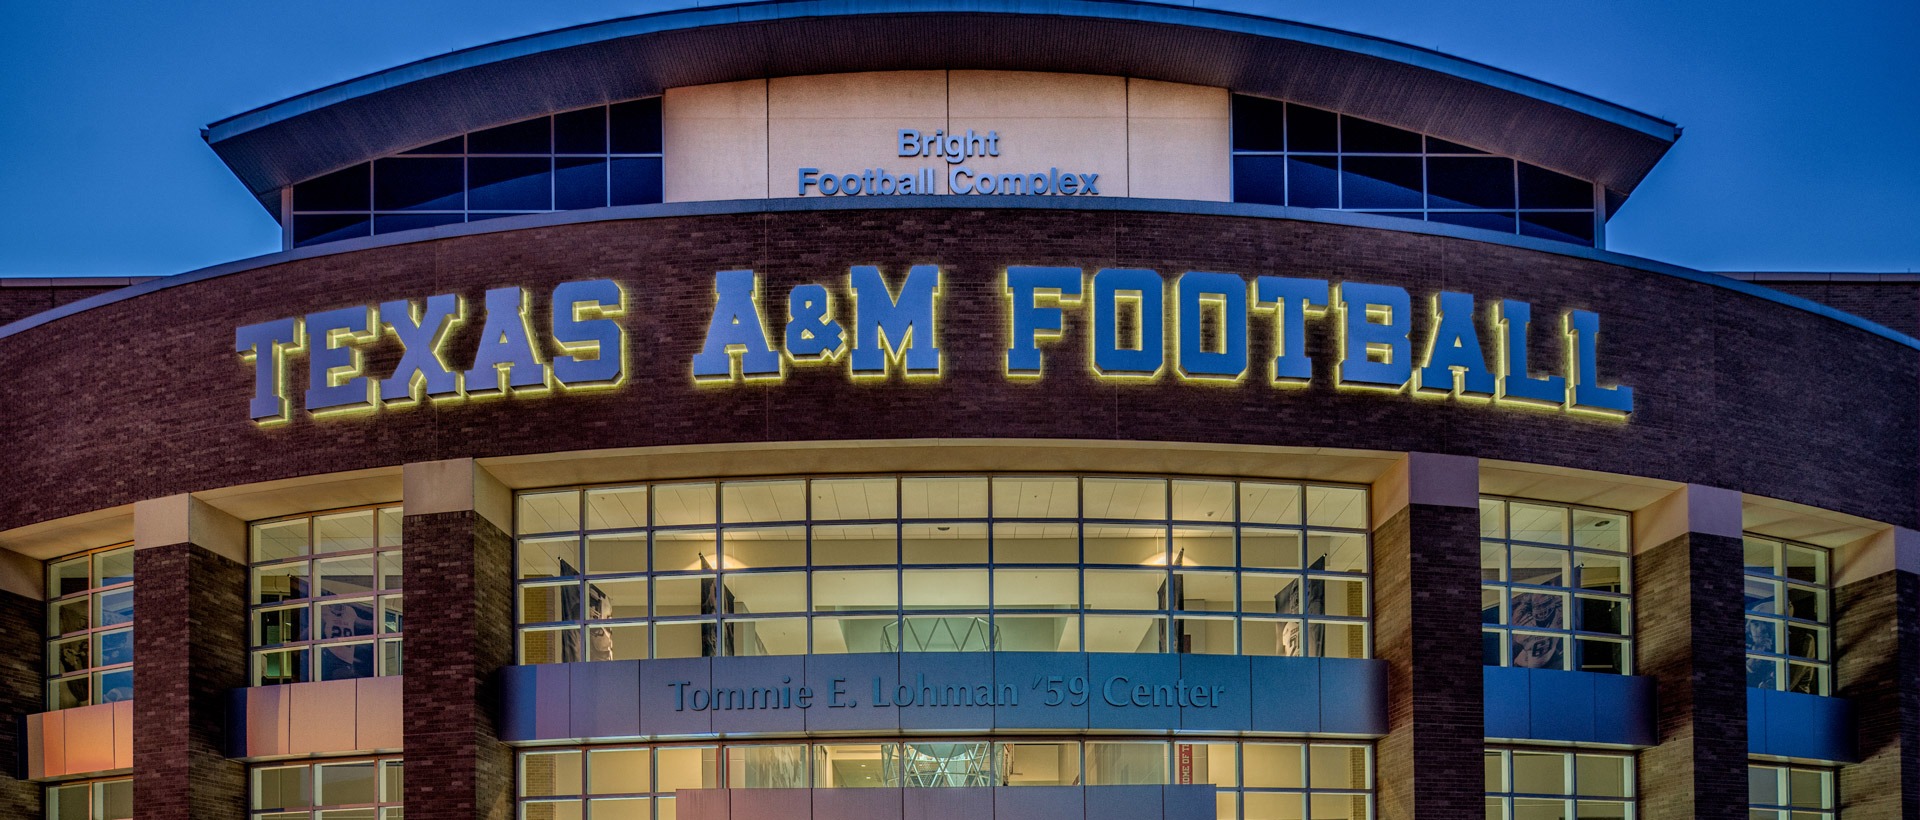 Bright Football Complex - Texas A&M University - Schulte Roofing